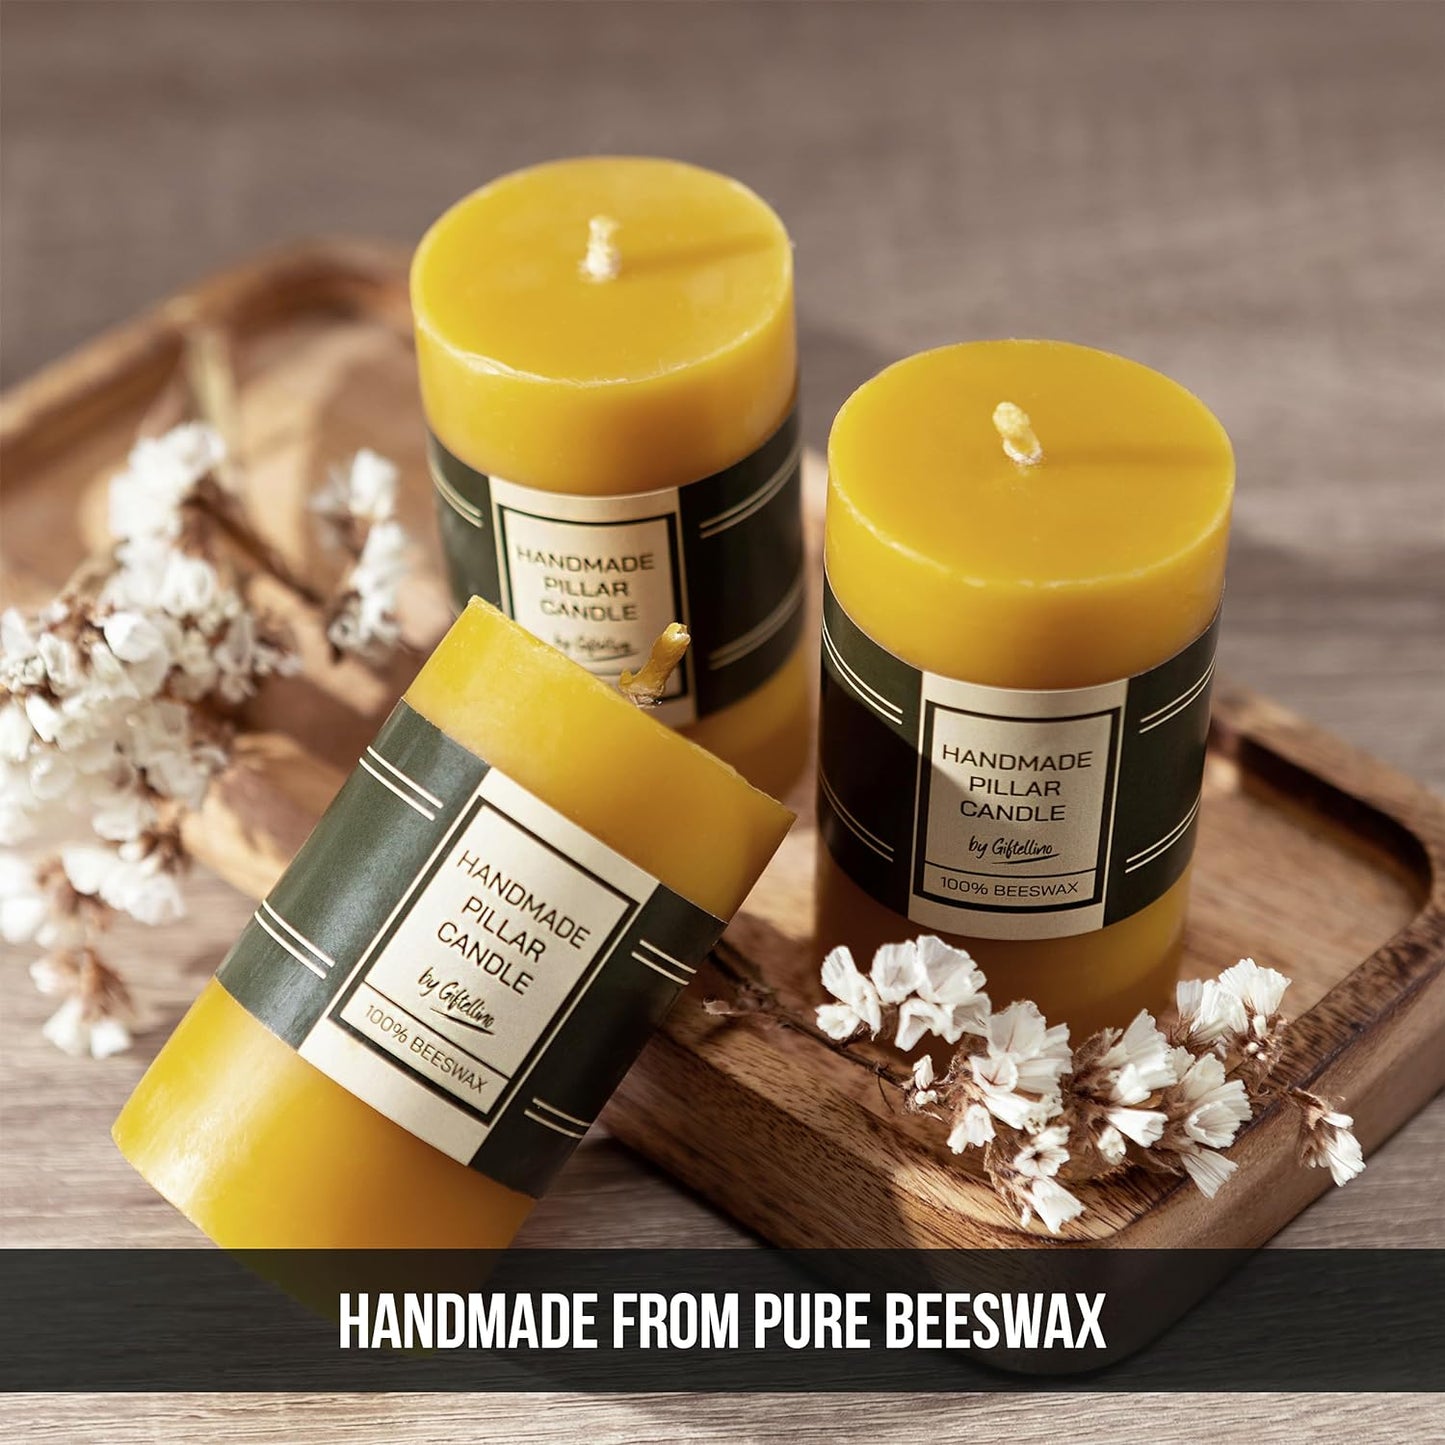 Set of 3 Beeswax Pillar Candle - 21 Hours Lasting Smokeless Pillar Candles with Cotton Wick - Unscented Candle Lover Gift - Dripless Beeswax Pillars